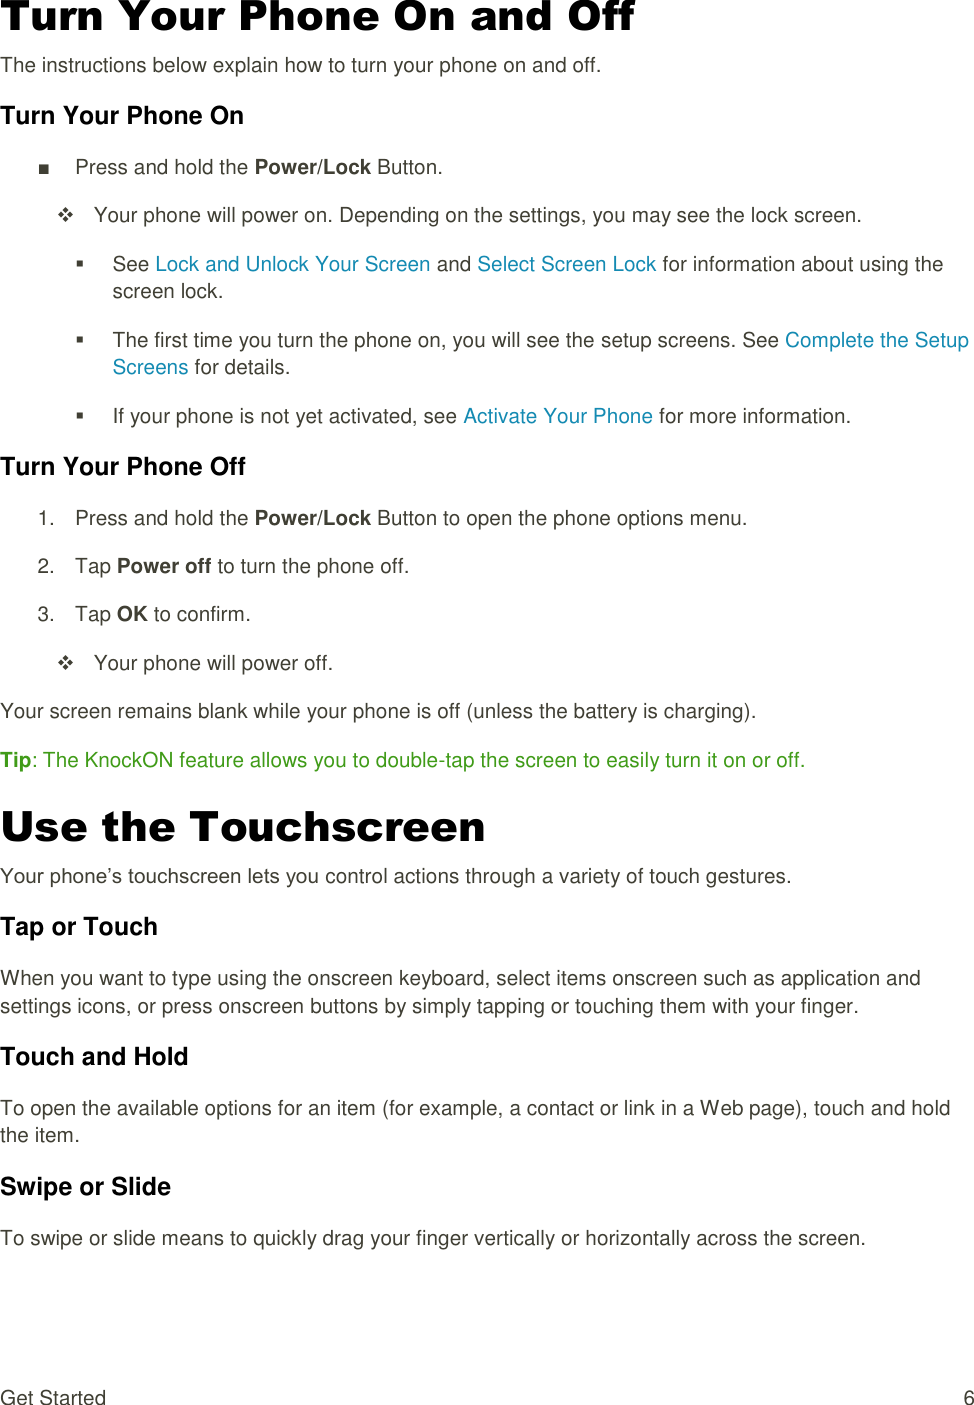 Get Started  6 Turn Your Phone On and Off The instructions below explain how to turn your phone on and off. Turn Your Phone On ■  Press and hold the Power/Lock Button.   Your phone will power on. Depending on the settings, you may see the lock screen.   See Lock and Unlock Your Screen and Select Screen Lock for information about using the screen lock.   The first time you turn the phone on, you will see the setup screens. See Complete the Setup Screens for details.   If your phone is not yet activated, see Activate Your Phone for more information. Turn Your Phone Off 1.  Press and hold the Power/Lock Button to open the phone options menu.  2.  Tap Power off to turn the phone off. 3.  Tap OK to confirm.   Your phone will power off. Your screen remains blank while your phone is off (unless the battery is charging). Tip: The KnockON feature allows you to double-tap the screen to easily turn it on or off. Use the Touchscreen Your phone‘s touchscreen lets you control actions through a variety of touch gestures. Tap or Touch When you want to type using the onscreen keyboard, select items onscreen such as application and settings icons, or press onscreen buttons by simply tapping or touching them with your finger. Touch and Hold To open the available options for an item (for example, a contact or link in a Web page), touch and hold the item. Swipe or Slide To swipe or slide means to quickly drag your finger vertically or horizontally across the screen. 